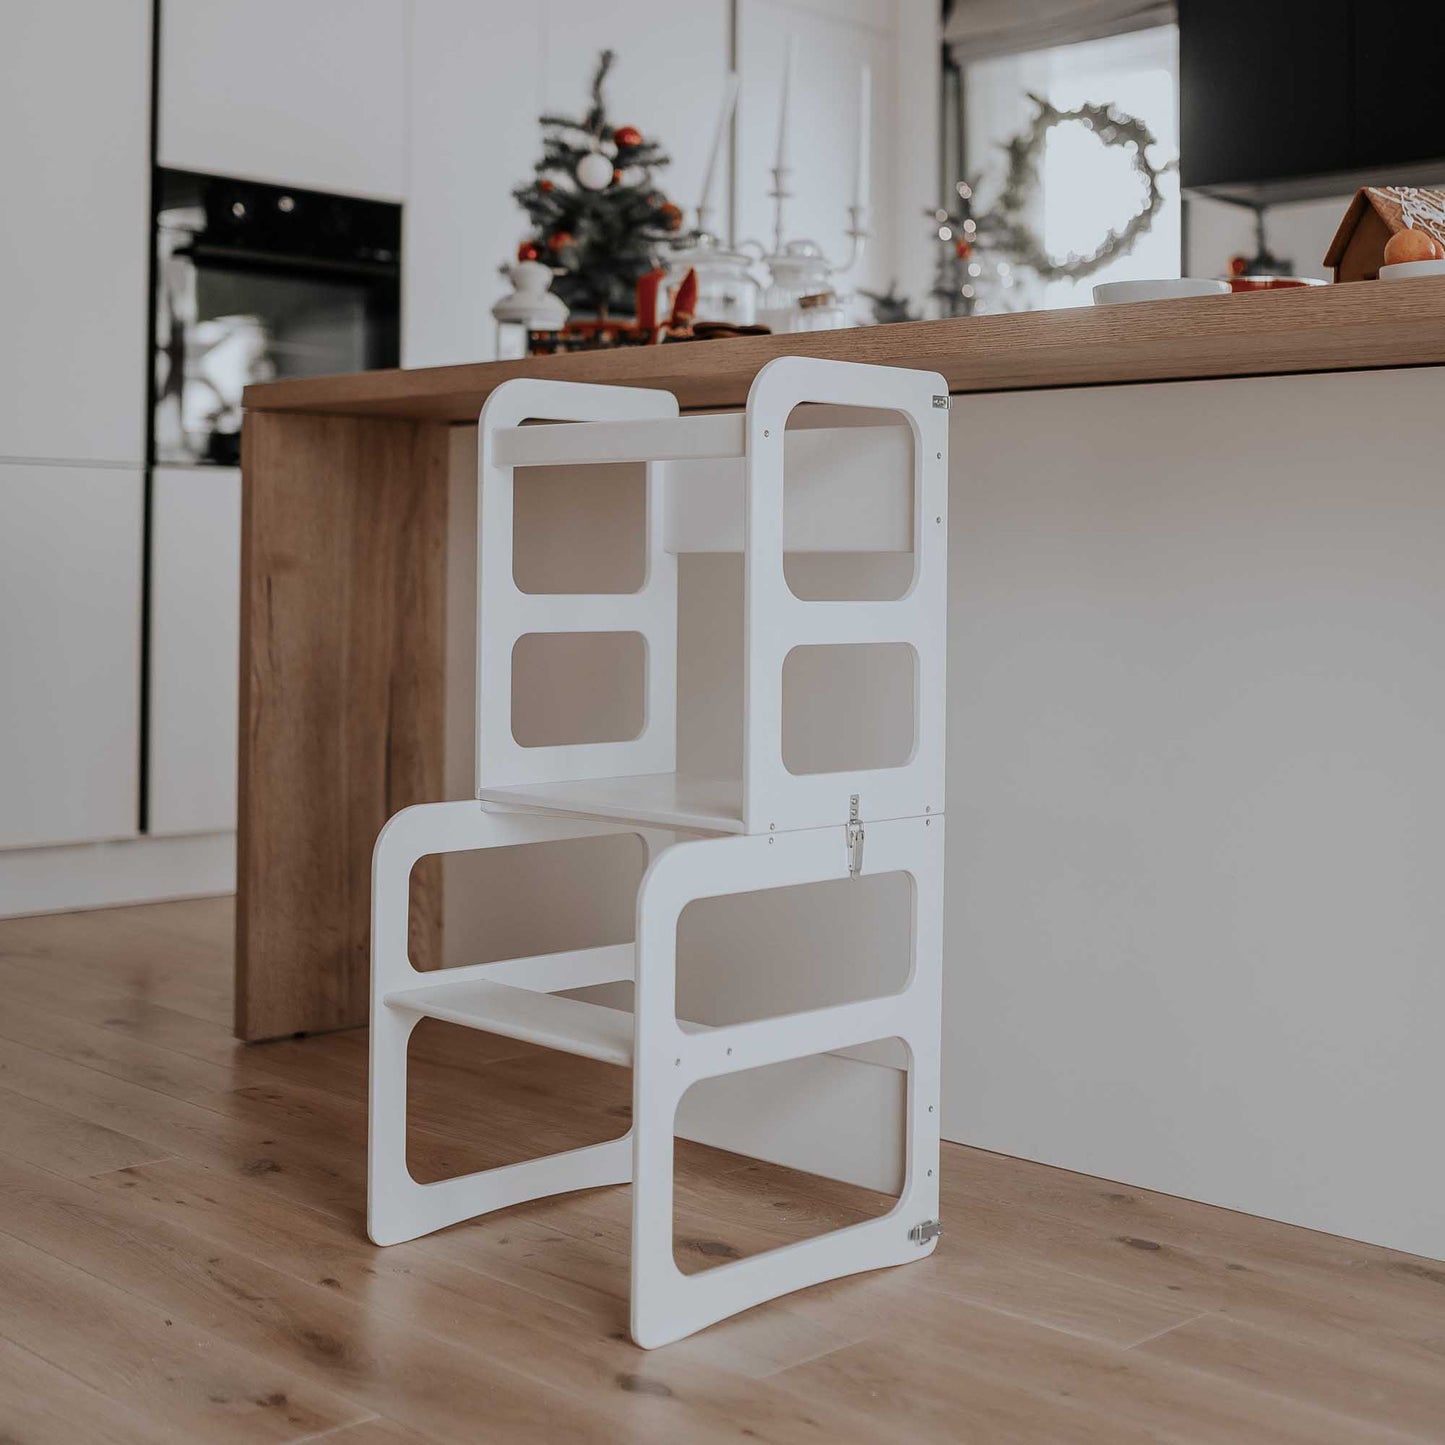 A white folding chair, also known as a Sweet Home From Wood 2-in-1 transformable kitchen tower - table and chair set, is placed in a kitchen.